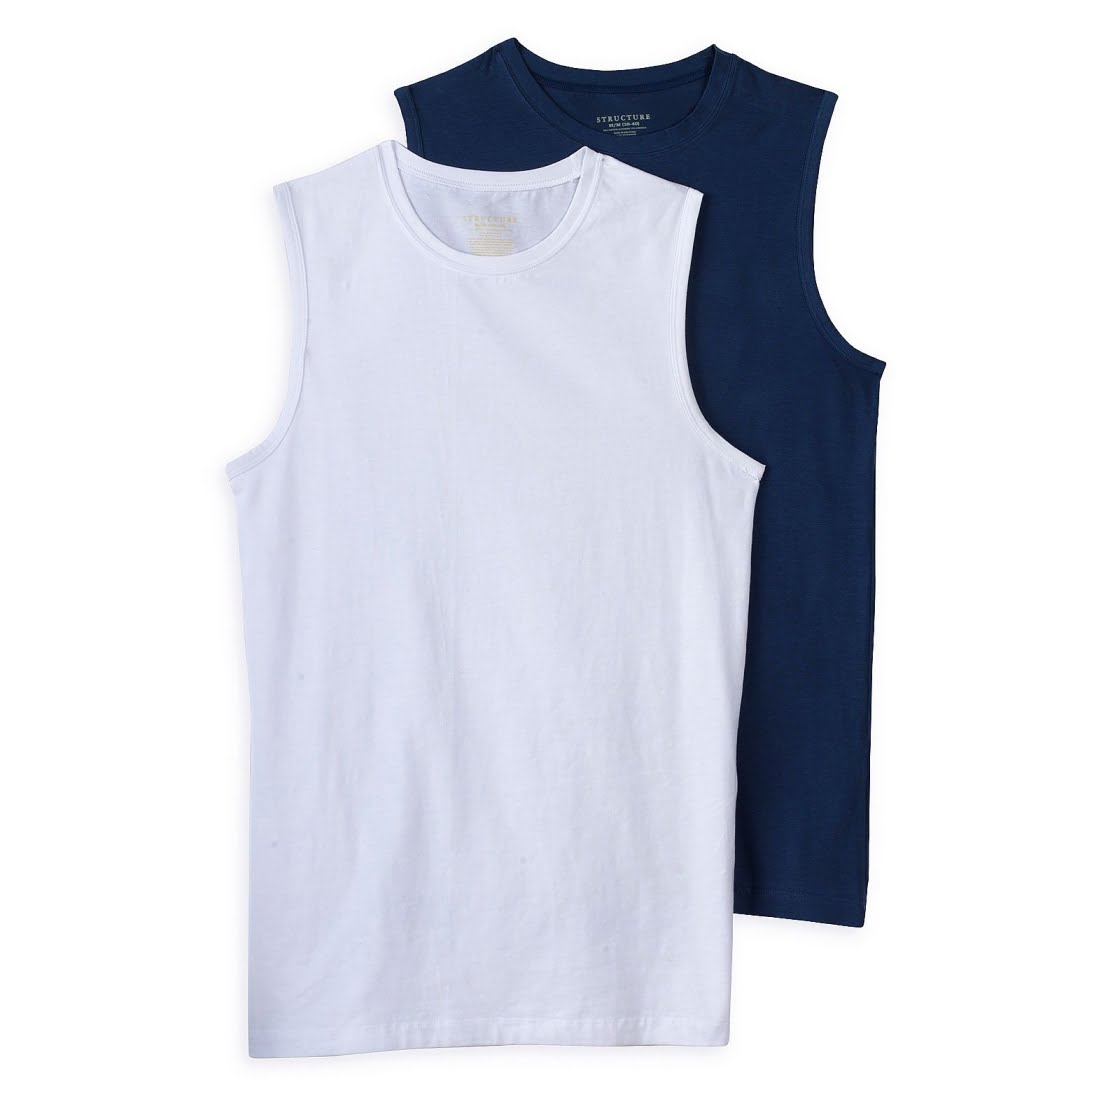 Picky About Your Muscle Shirts? Try This Reader's Recommendation ...